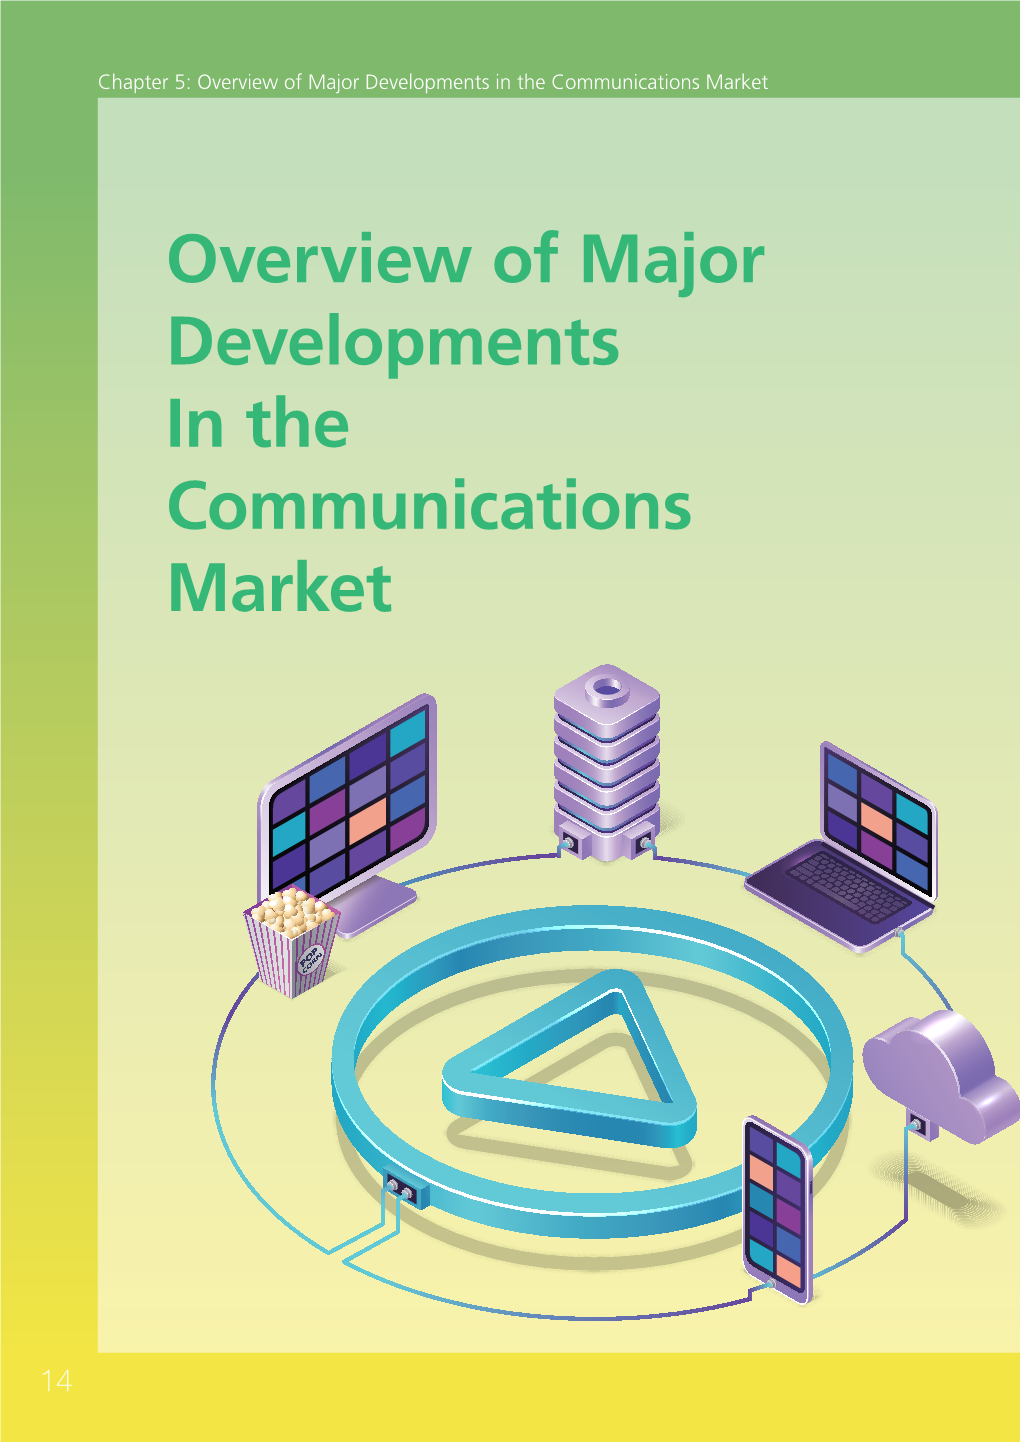 Overview of Major Developments in the Communications Market